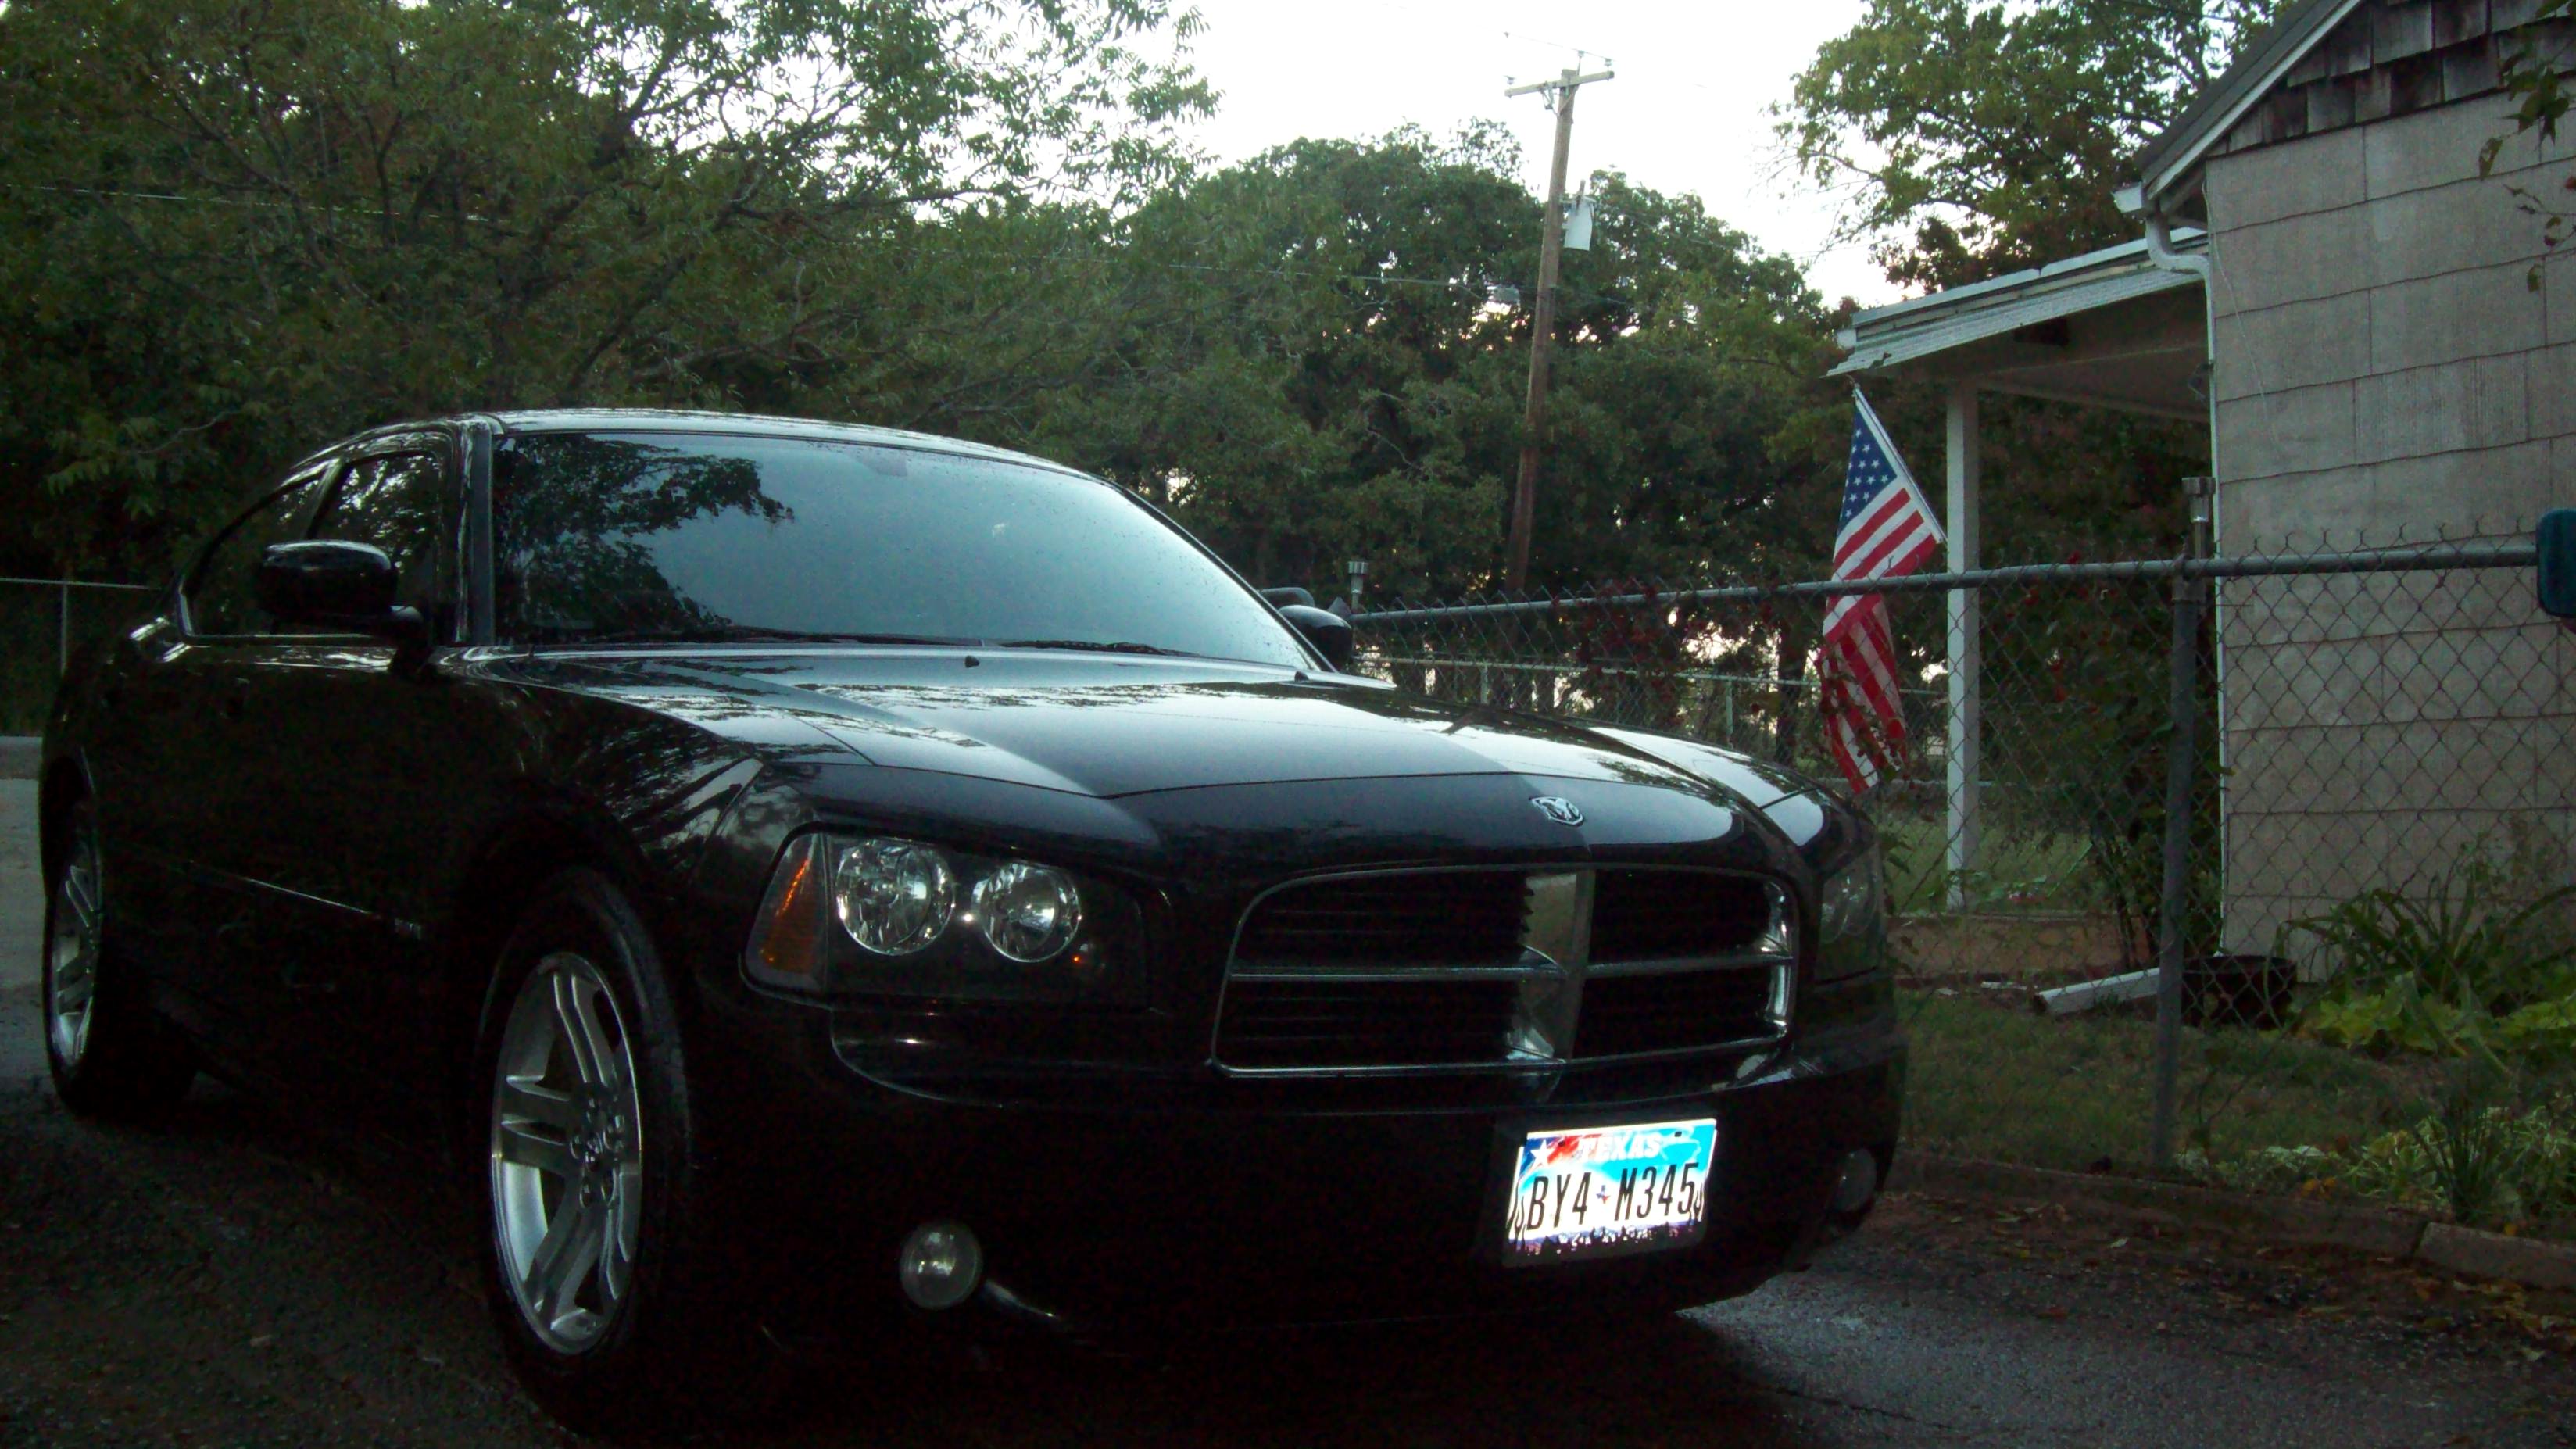  2006 Dodge Charger R/T